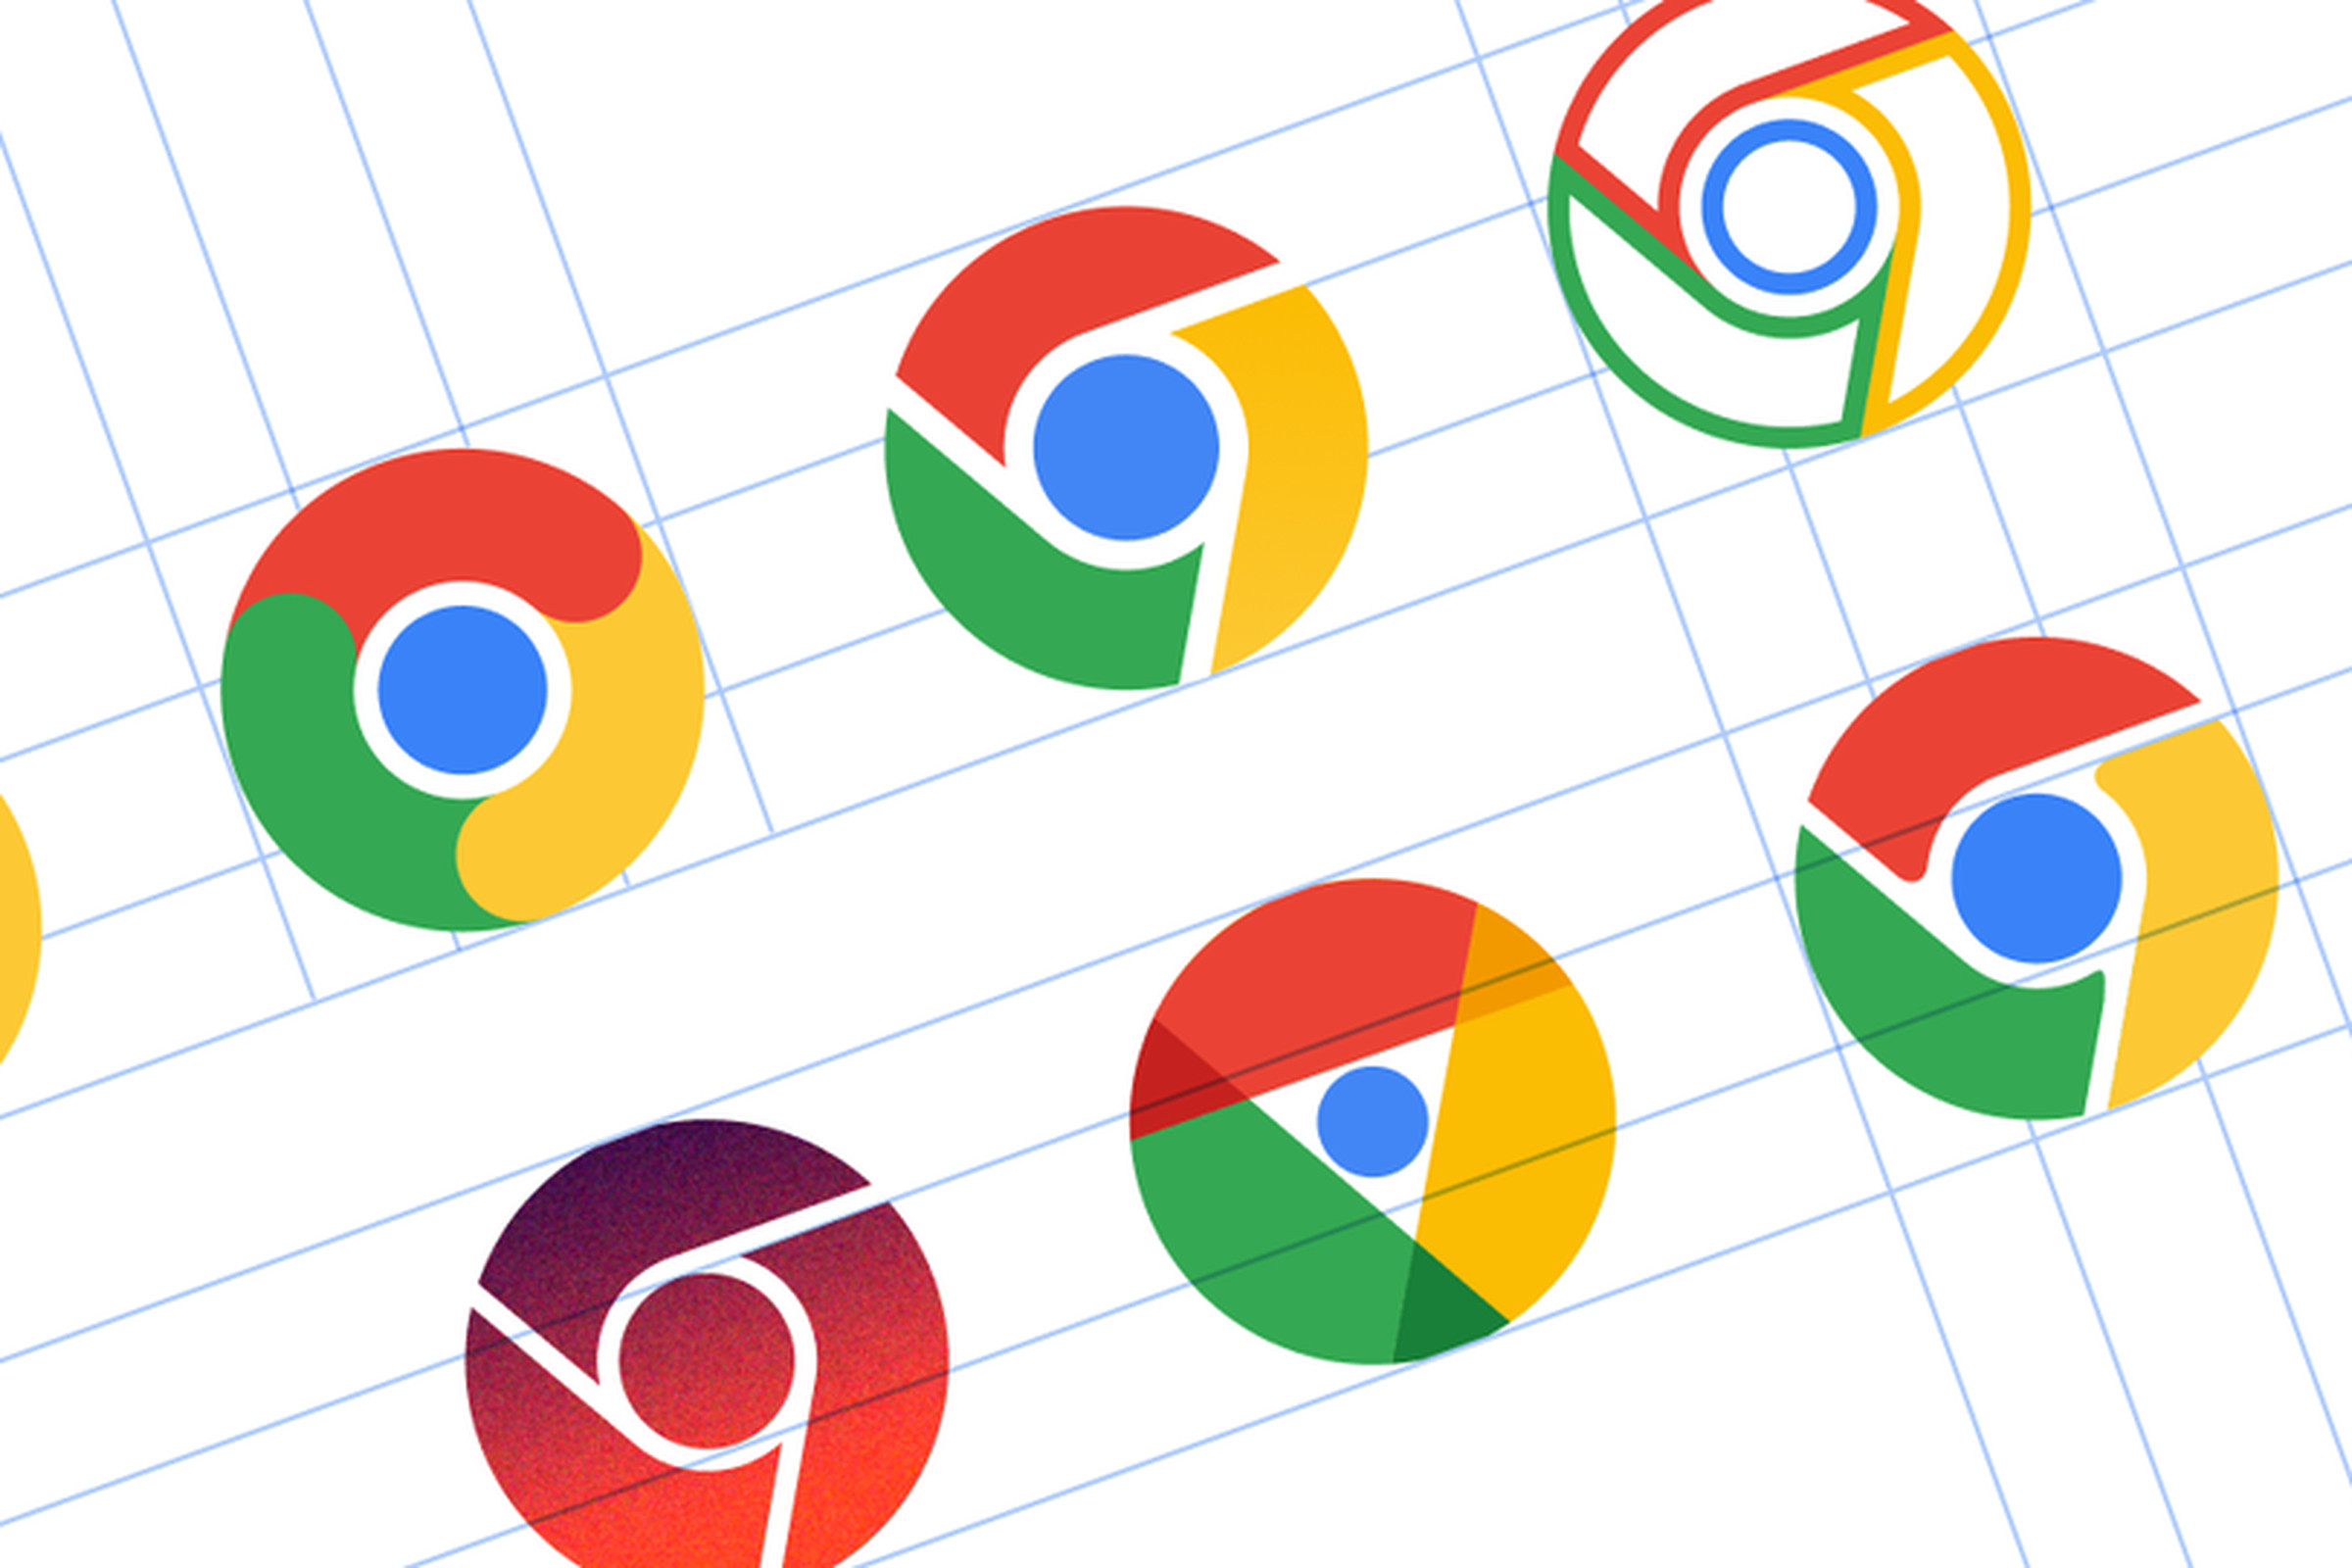 Proposed redesigns of the Chrome icon.